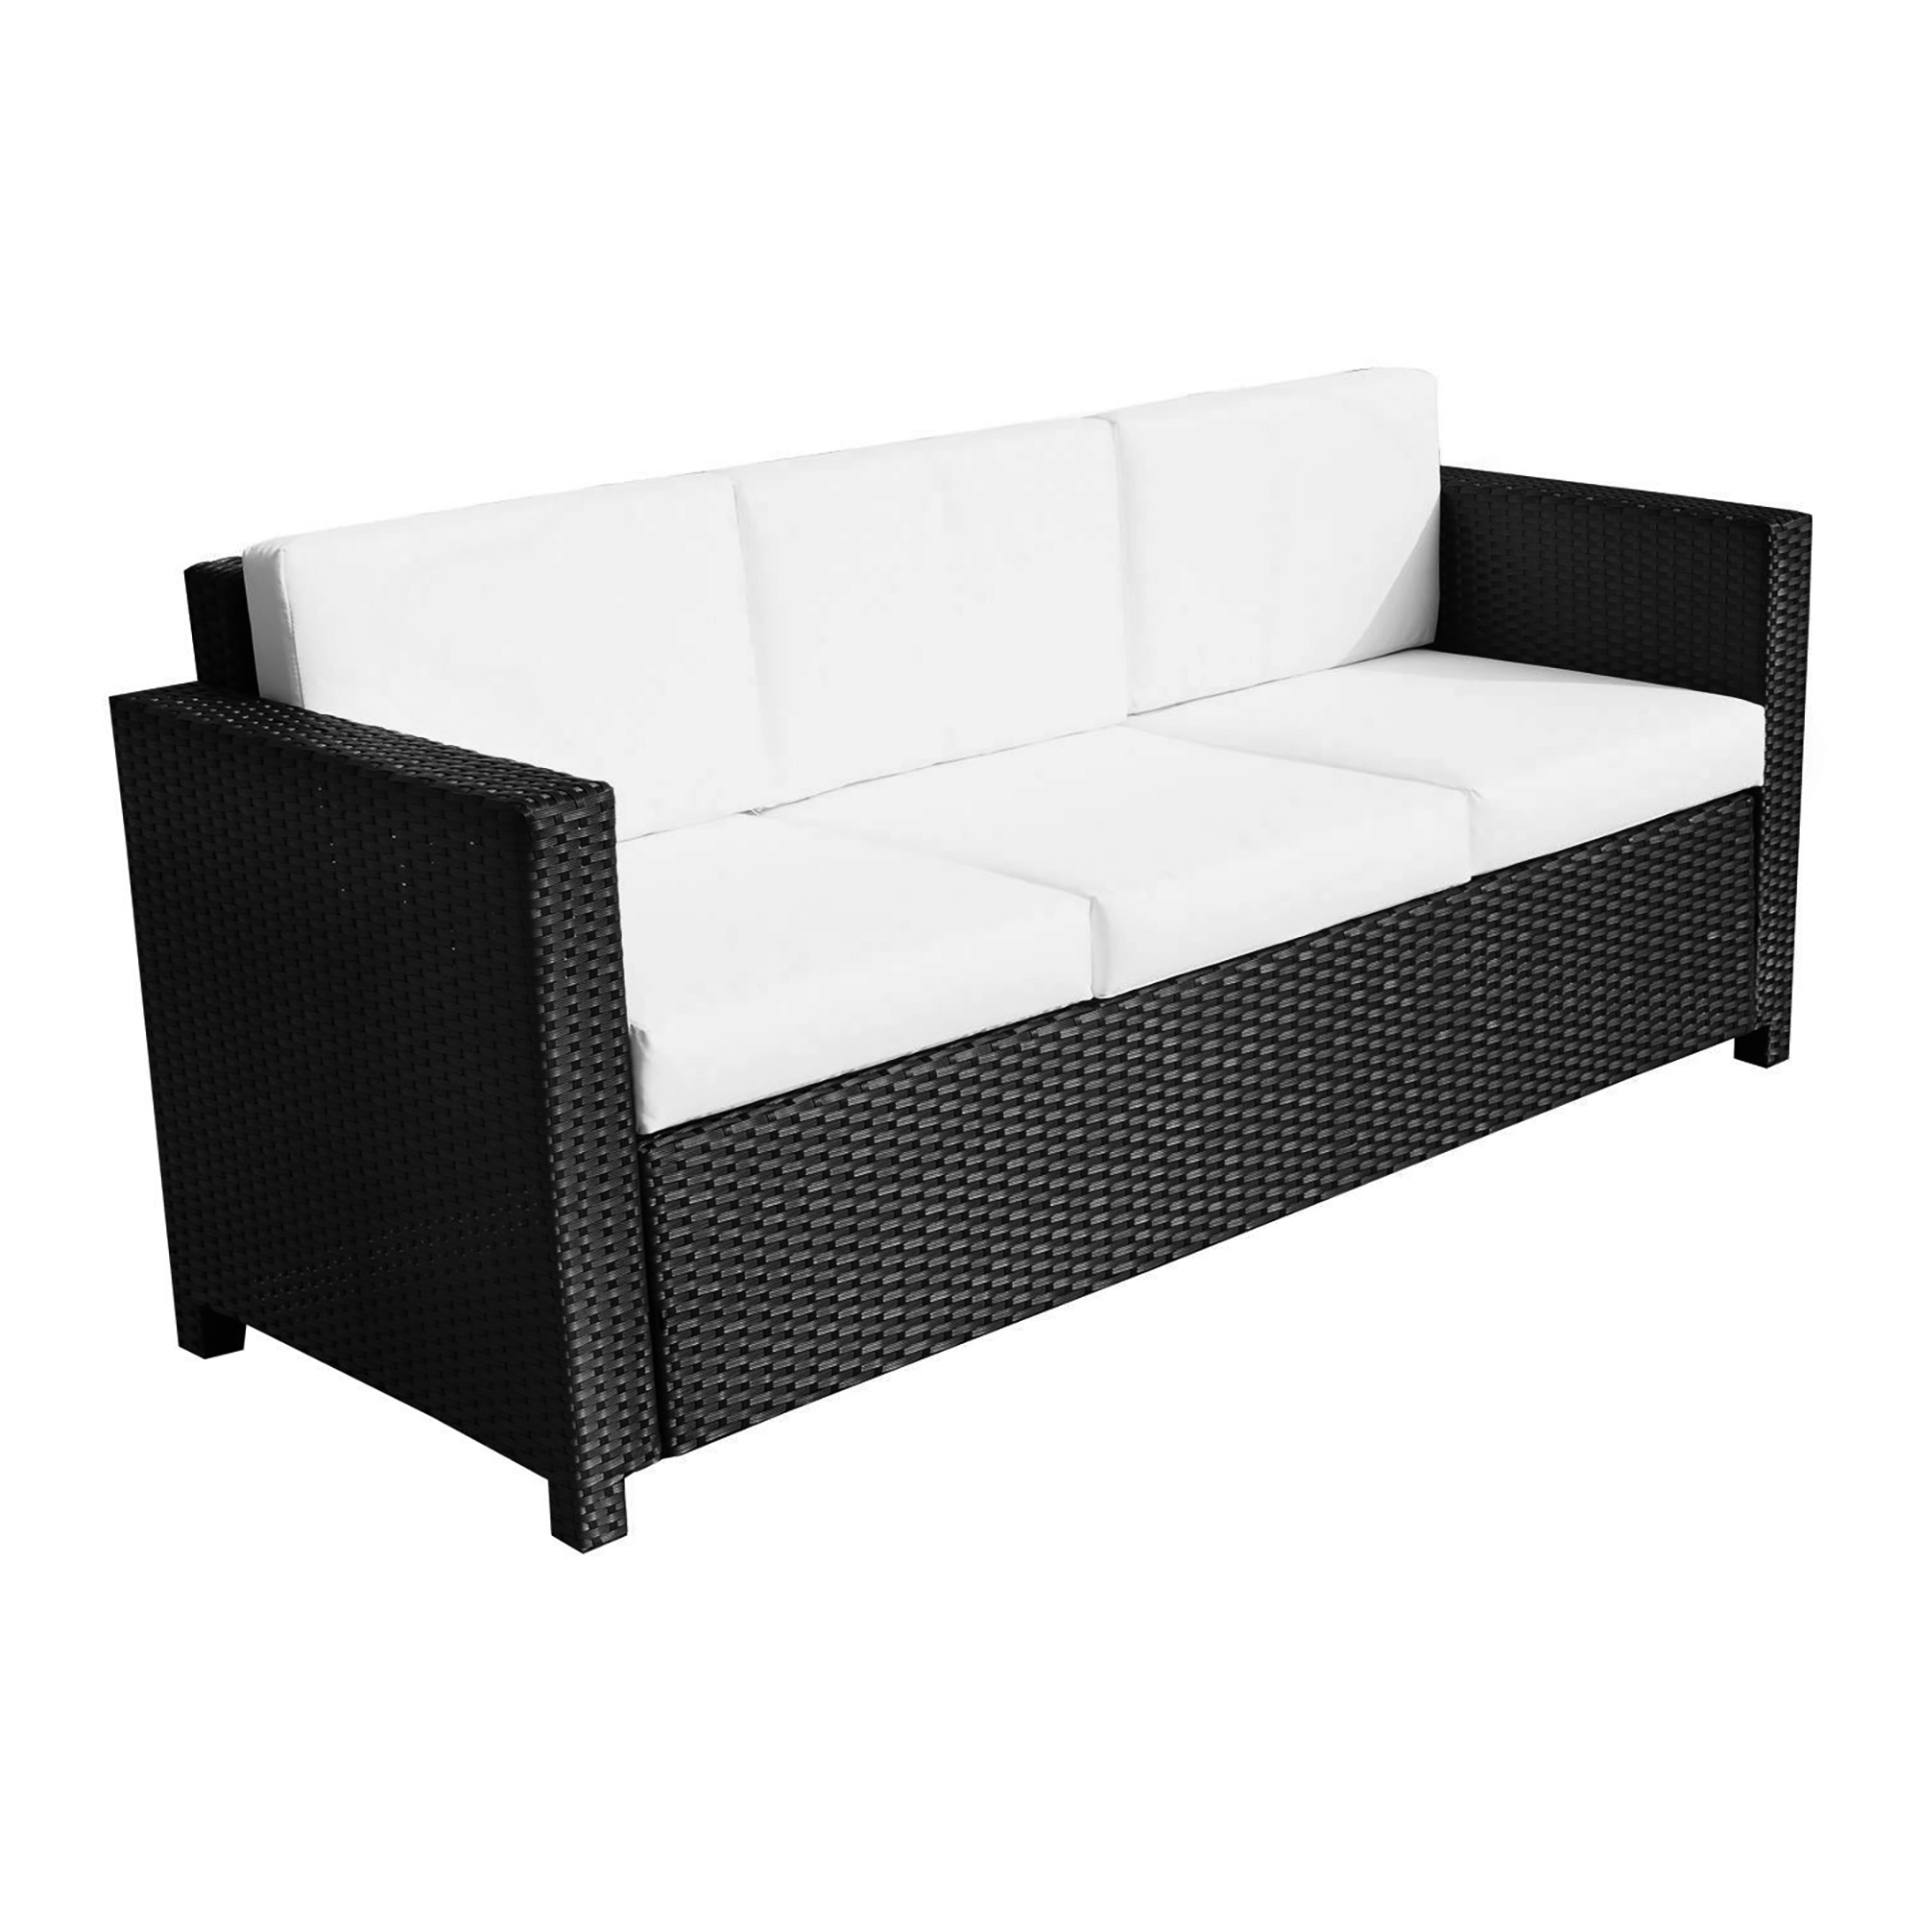 Outsunny 3 Seater Rattan Sofa All-Weather Wicker Weave Metal Frame Chair with Fire Resistant Cushion - Black